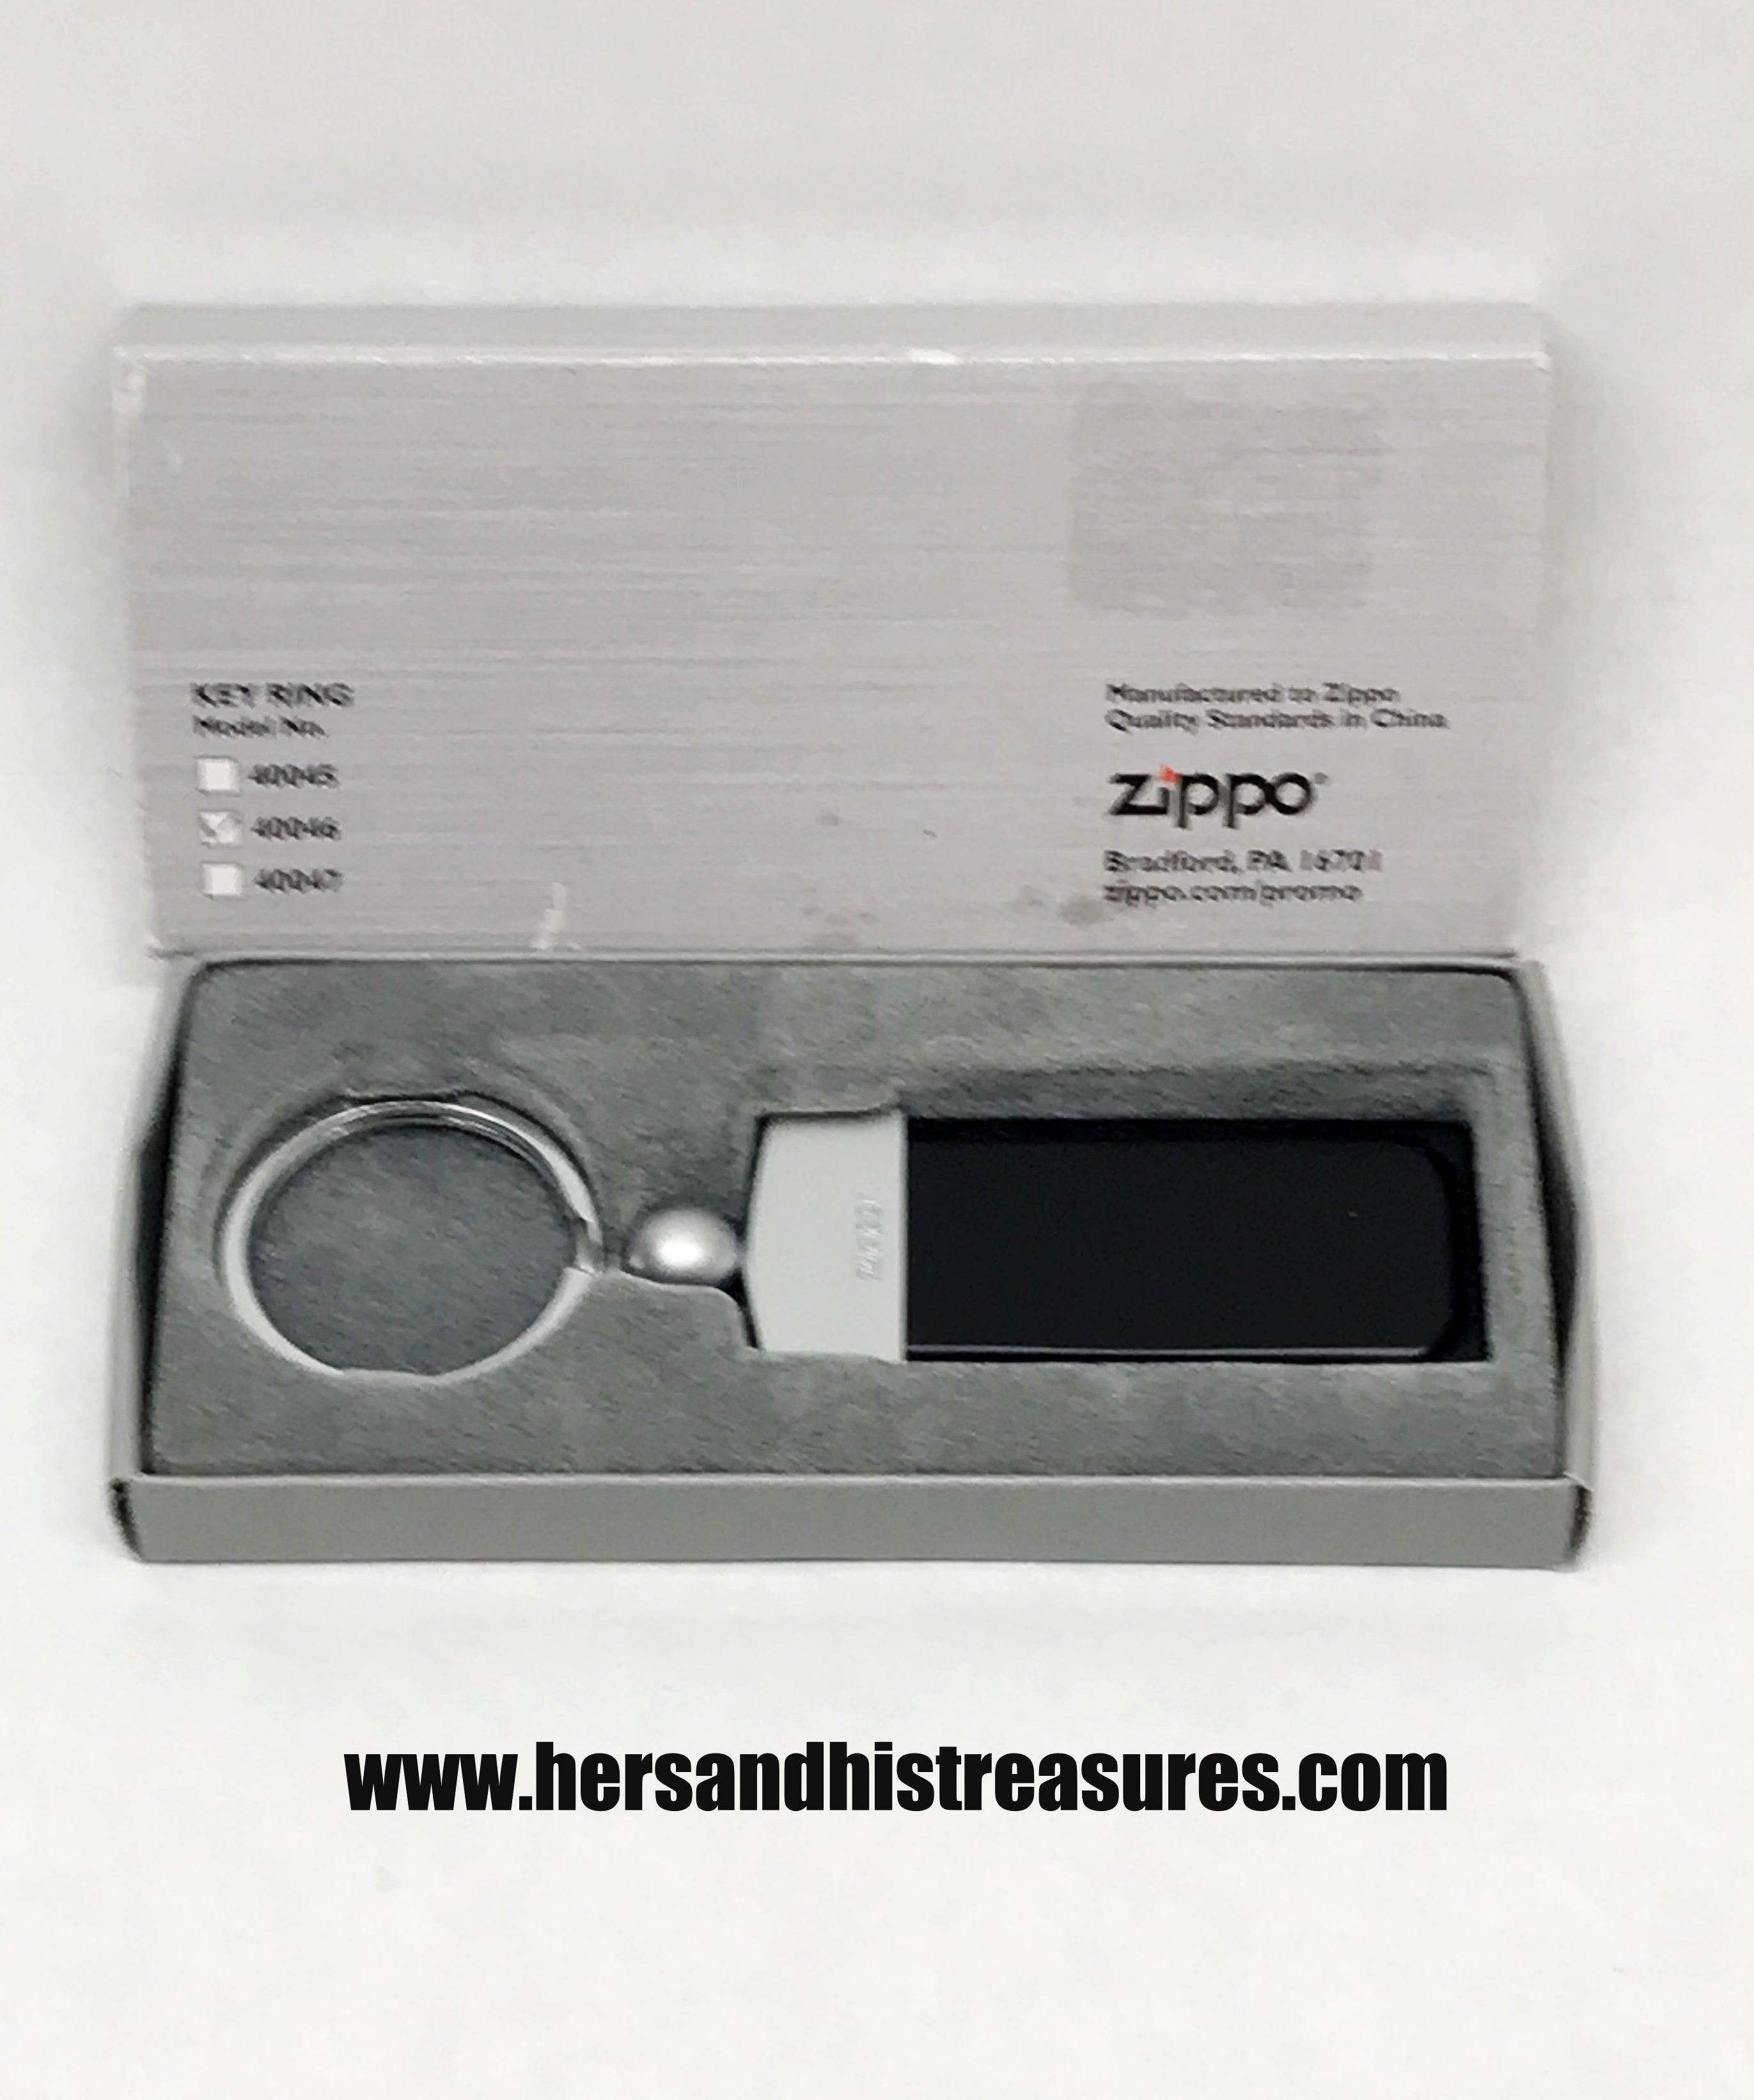 Zippo Promotional Key Ring – Hers and His Treasures